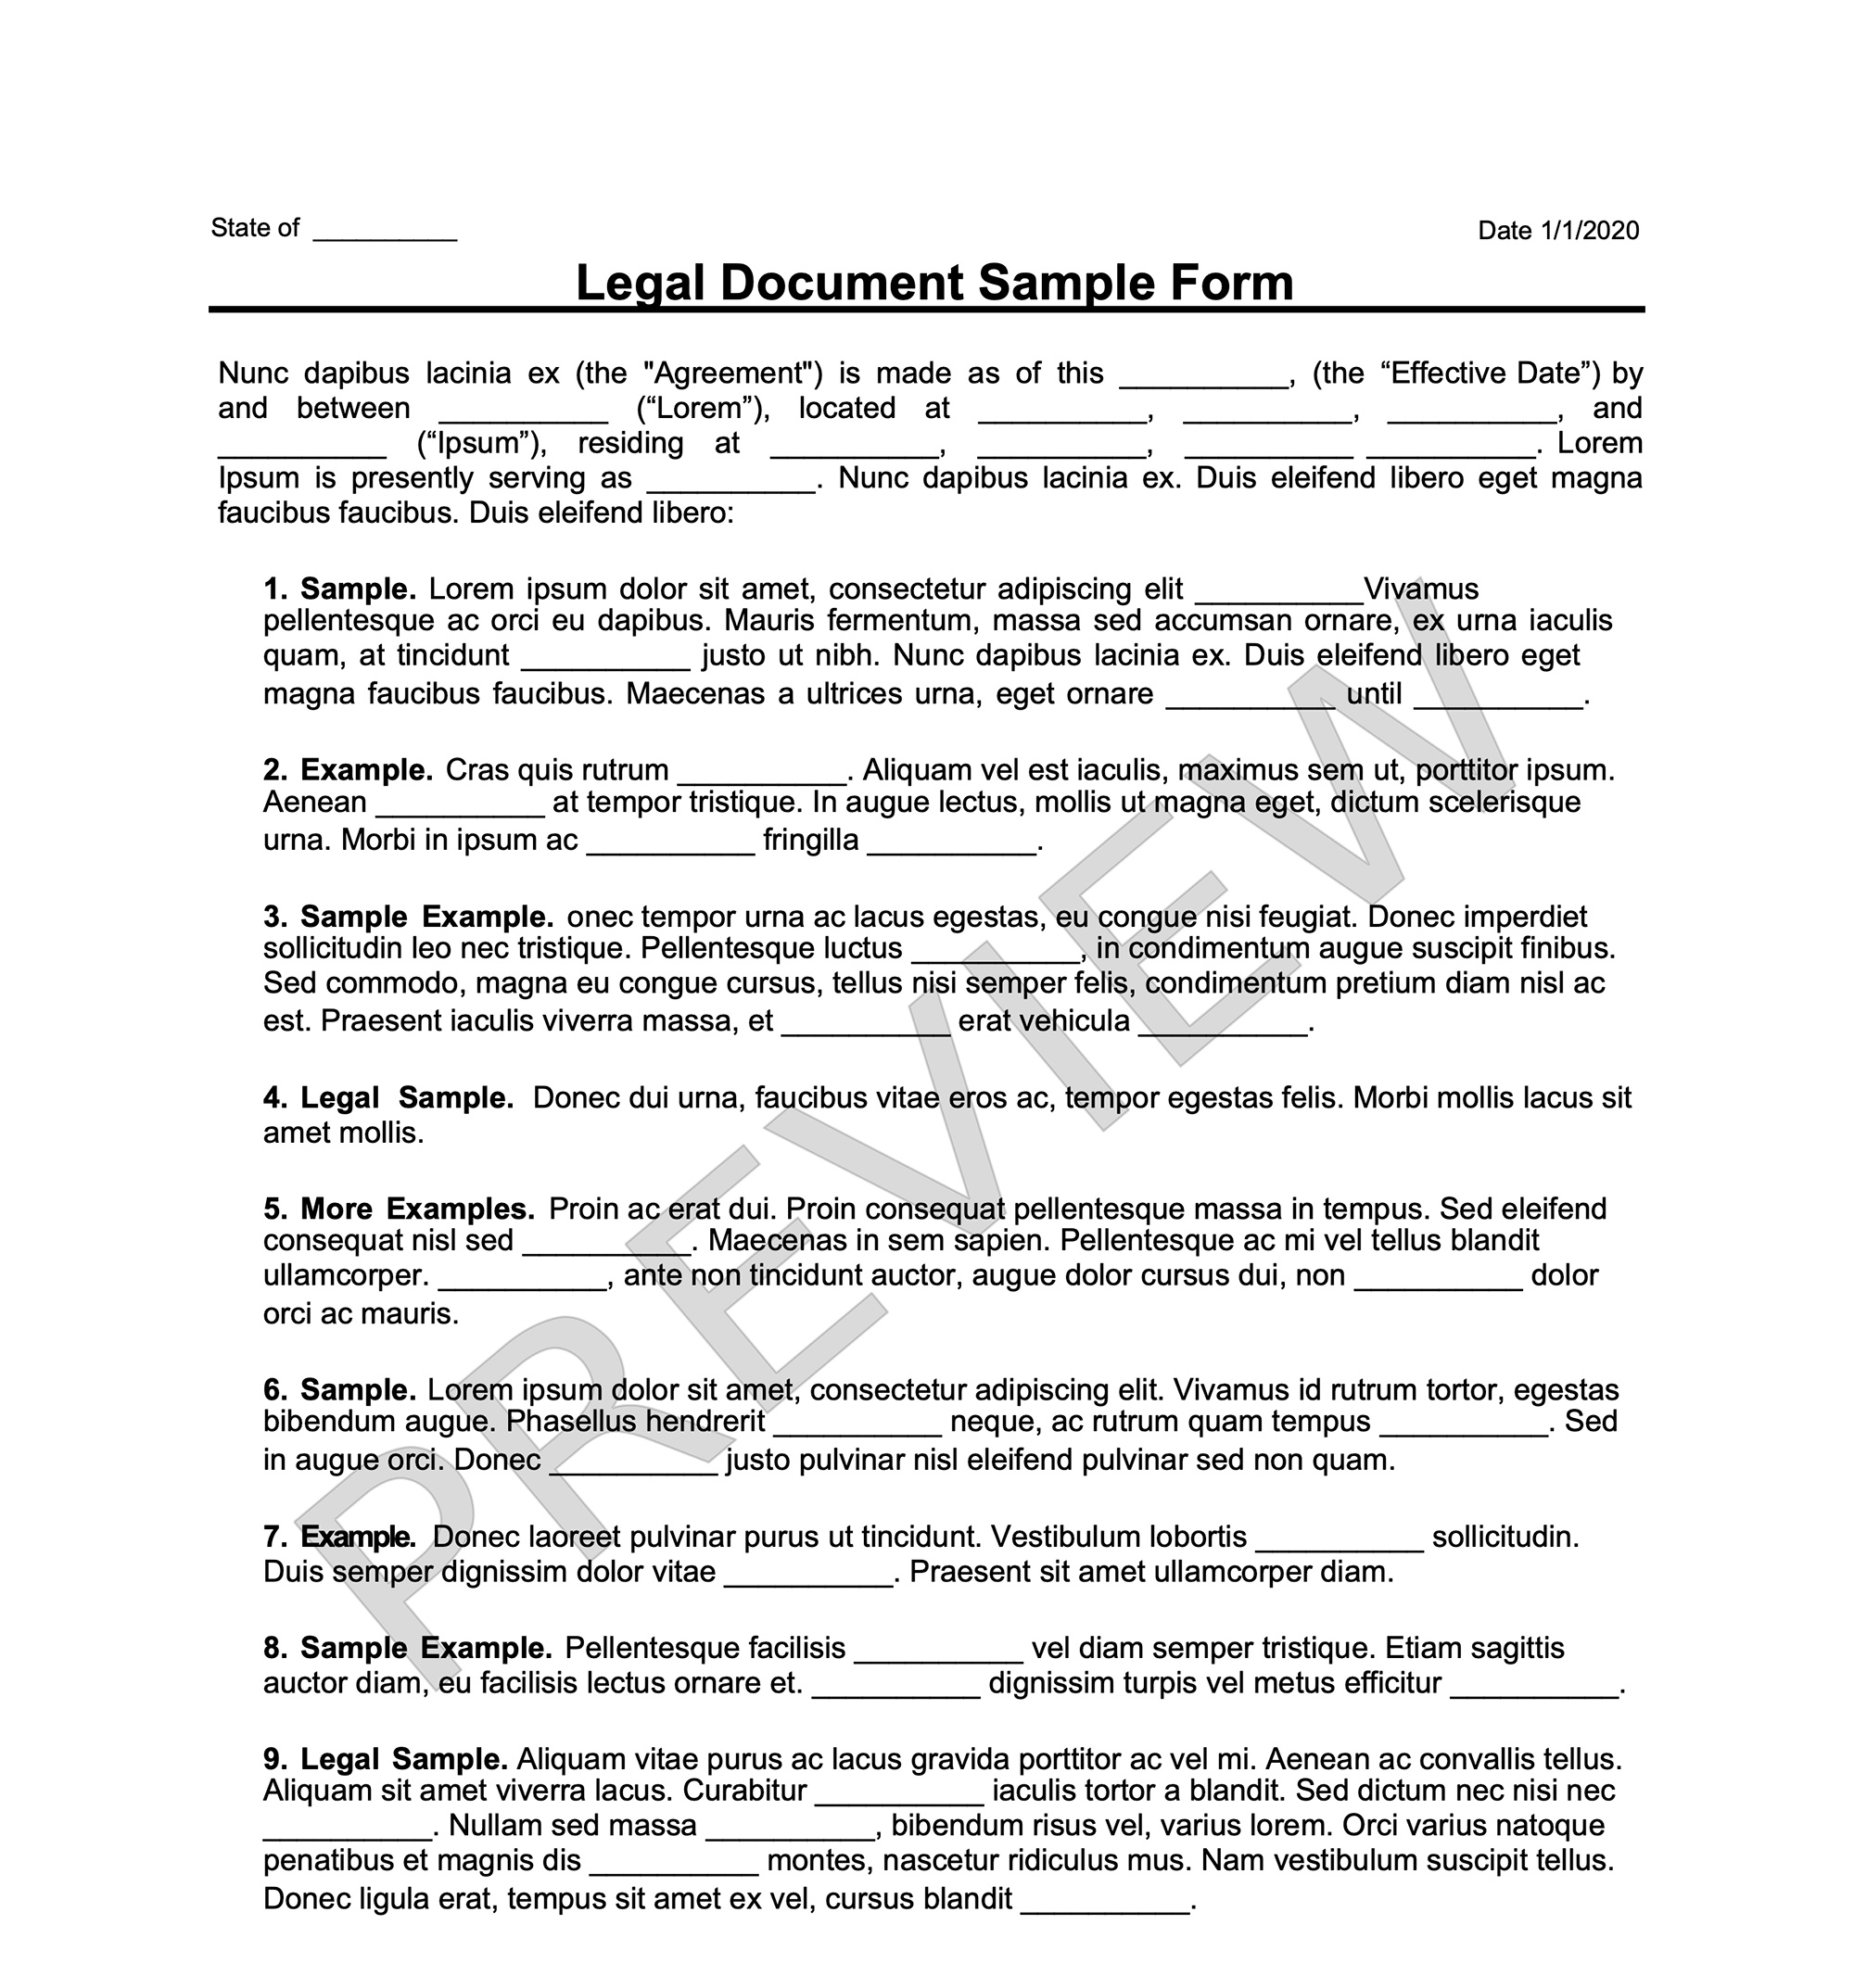 Promissory Note Template Promissory Note 360 Legal Forms